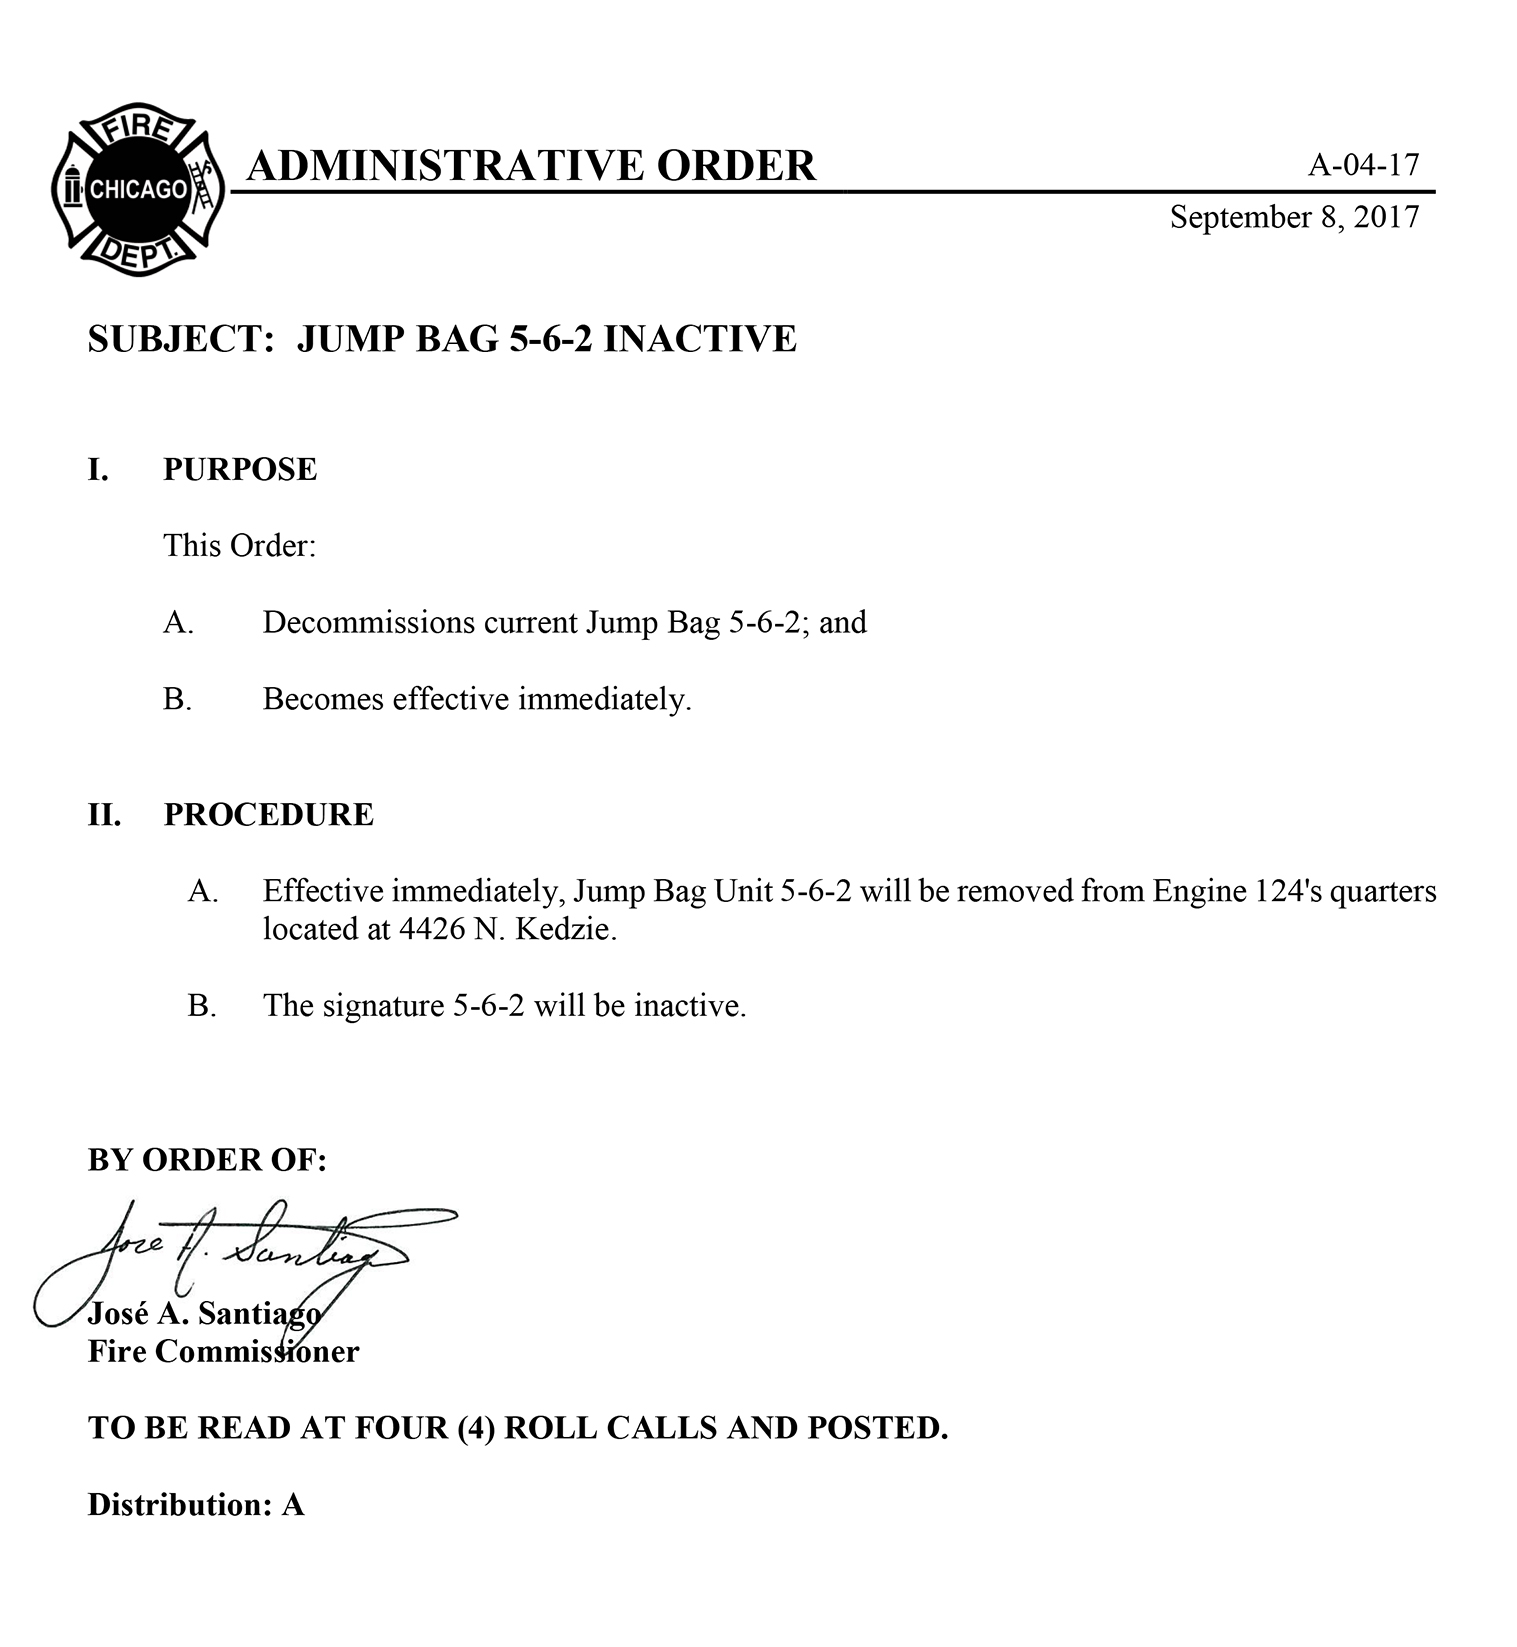 Chicago FD Administrative Order A-04-17